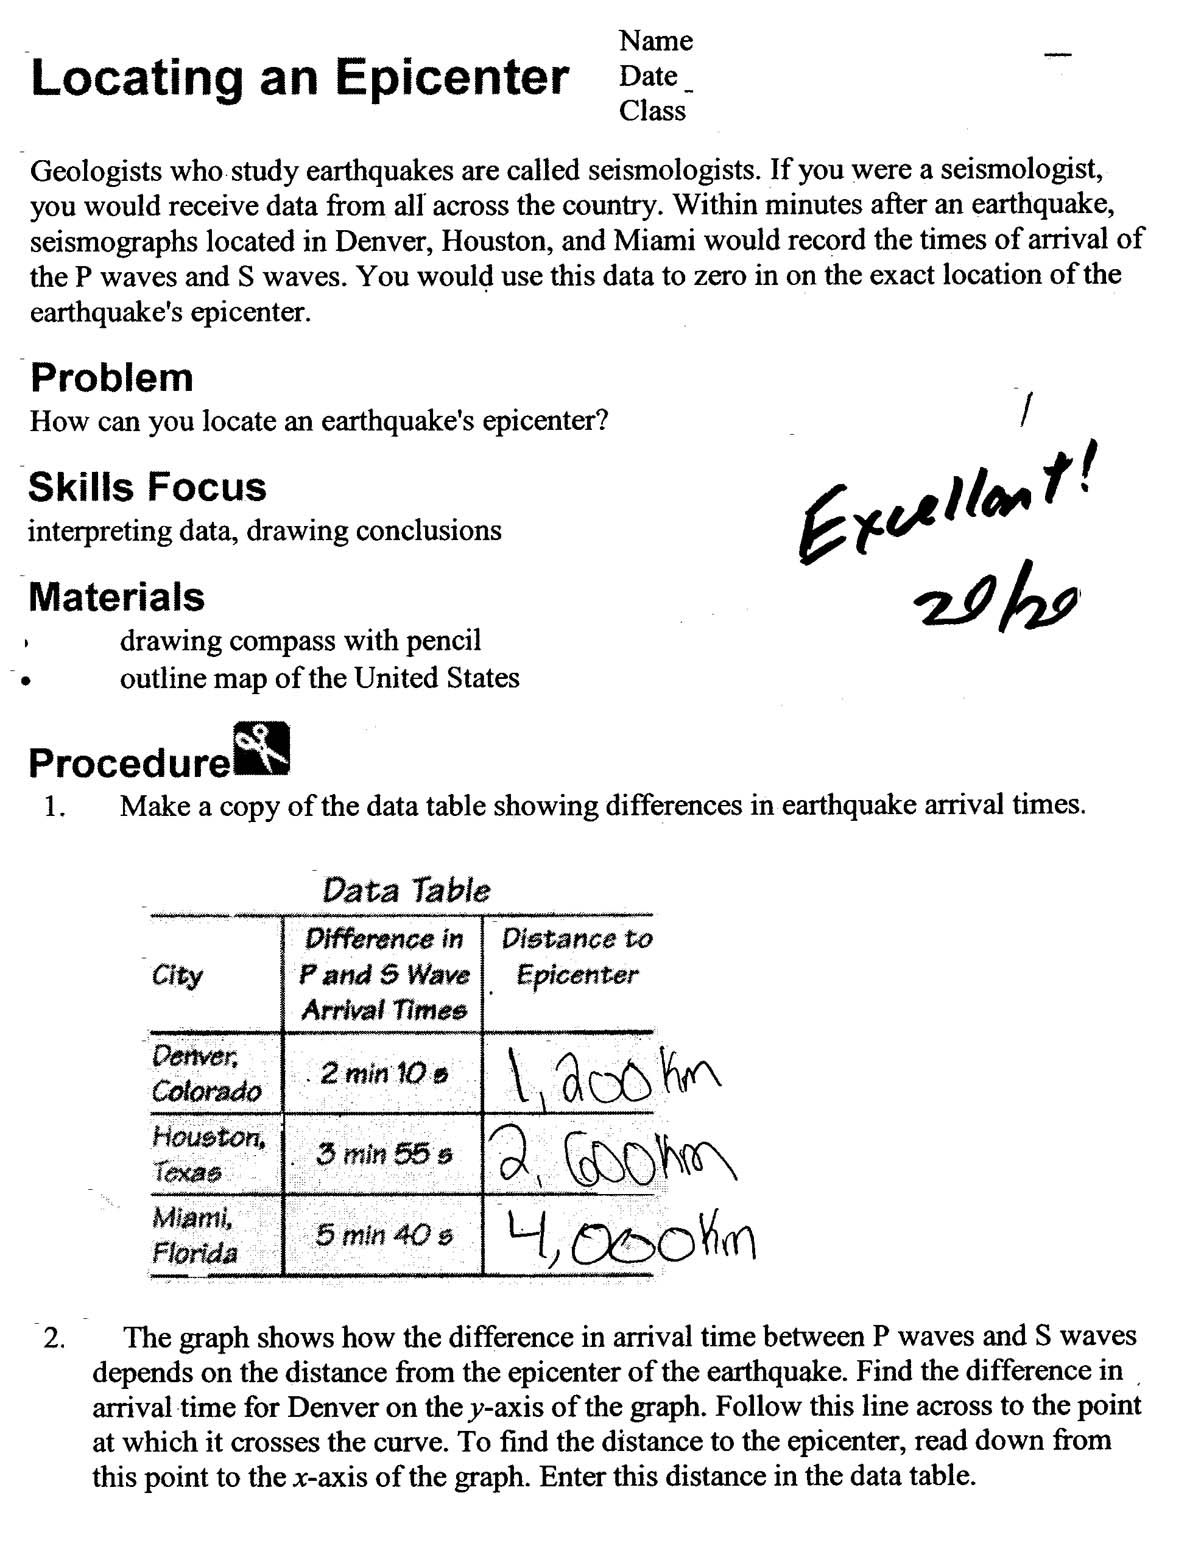 earthquake-epicenter-worksheet-free-download-goodimg-co